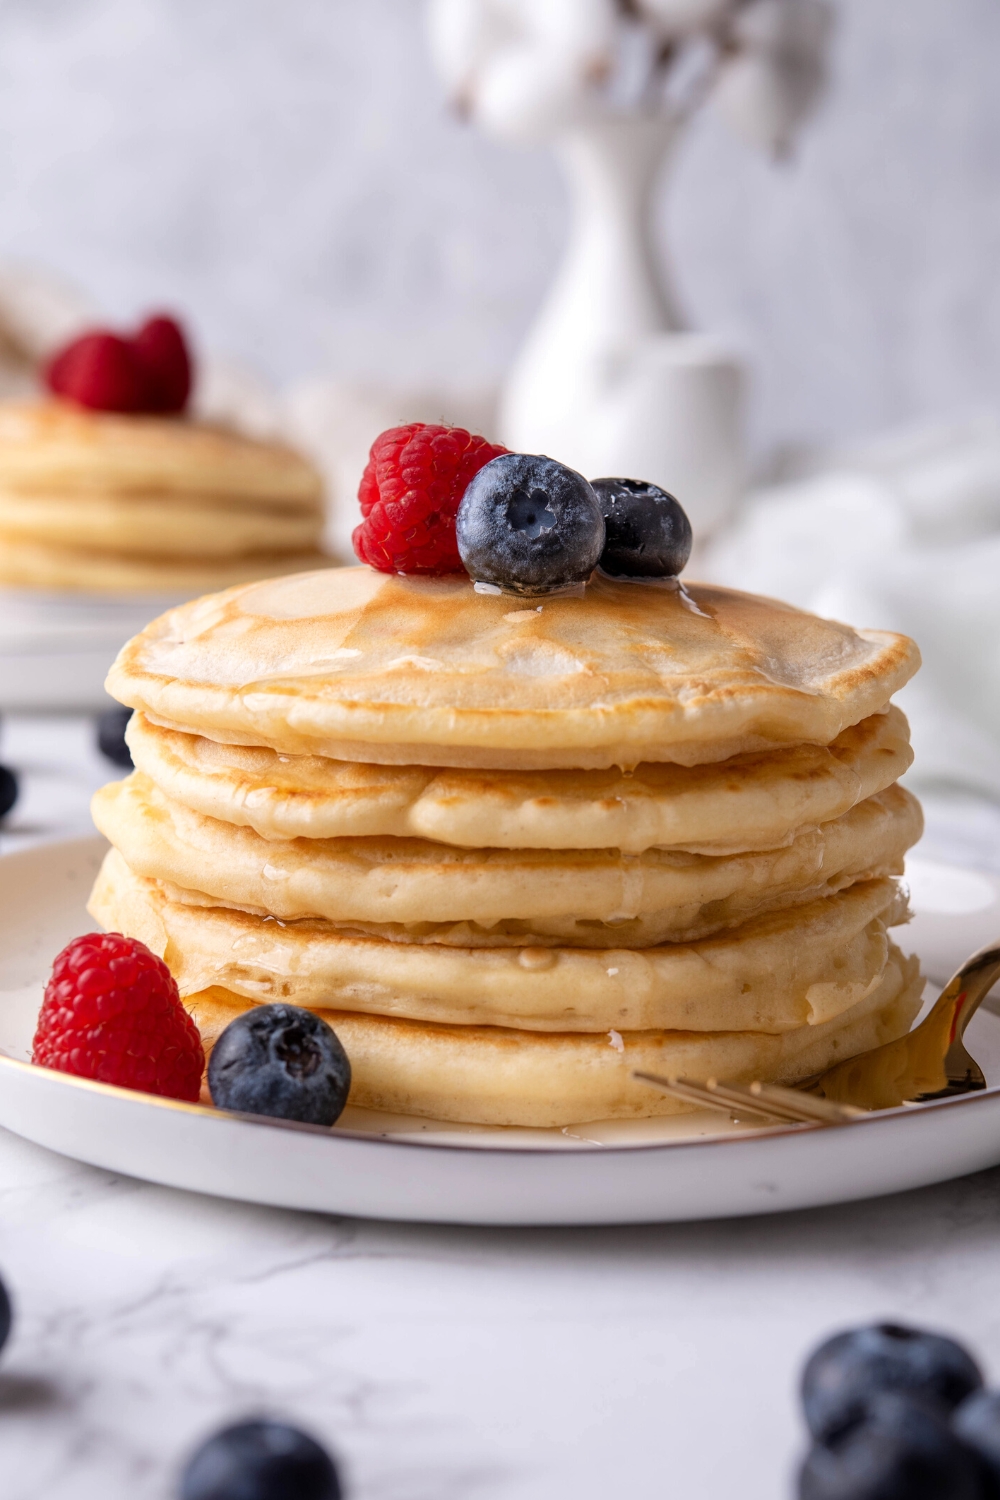 A stack of five pancakes with blueberries and a raspberry on top on a plate.